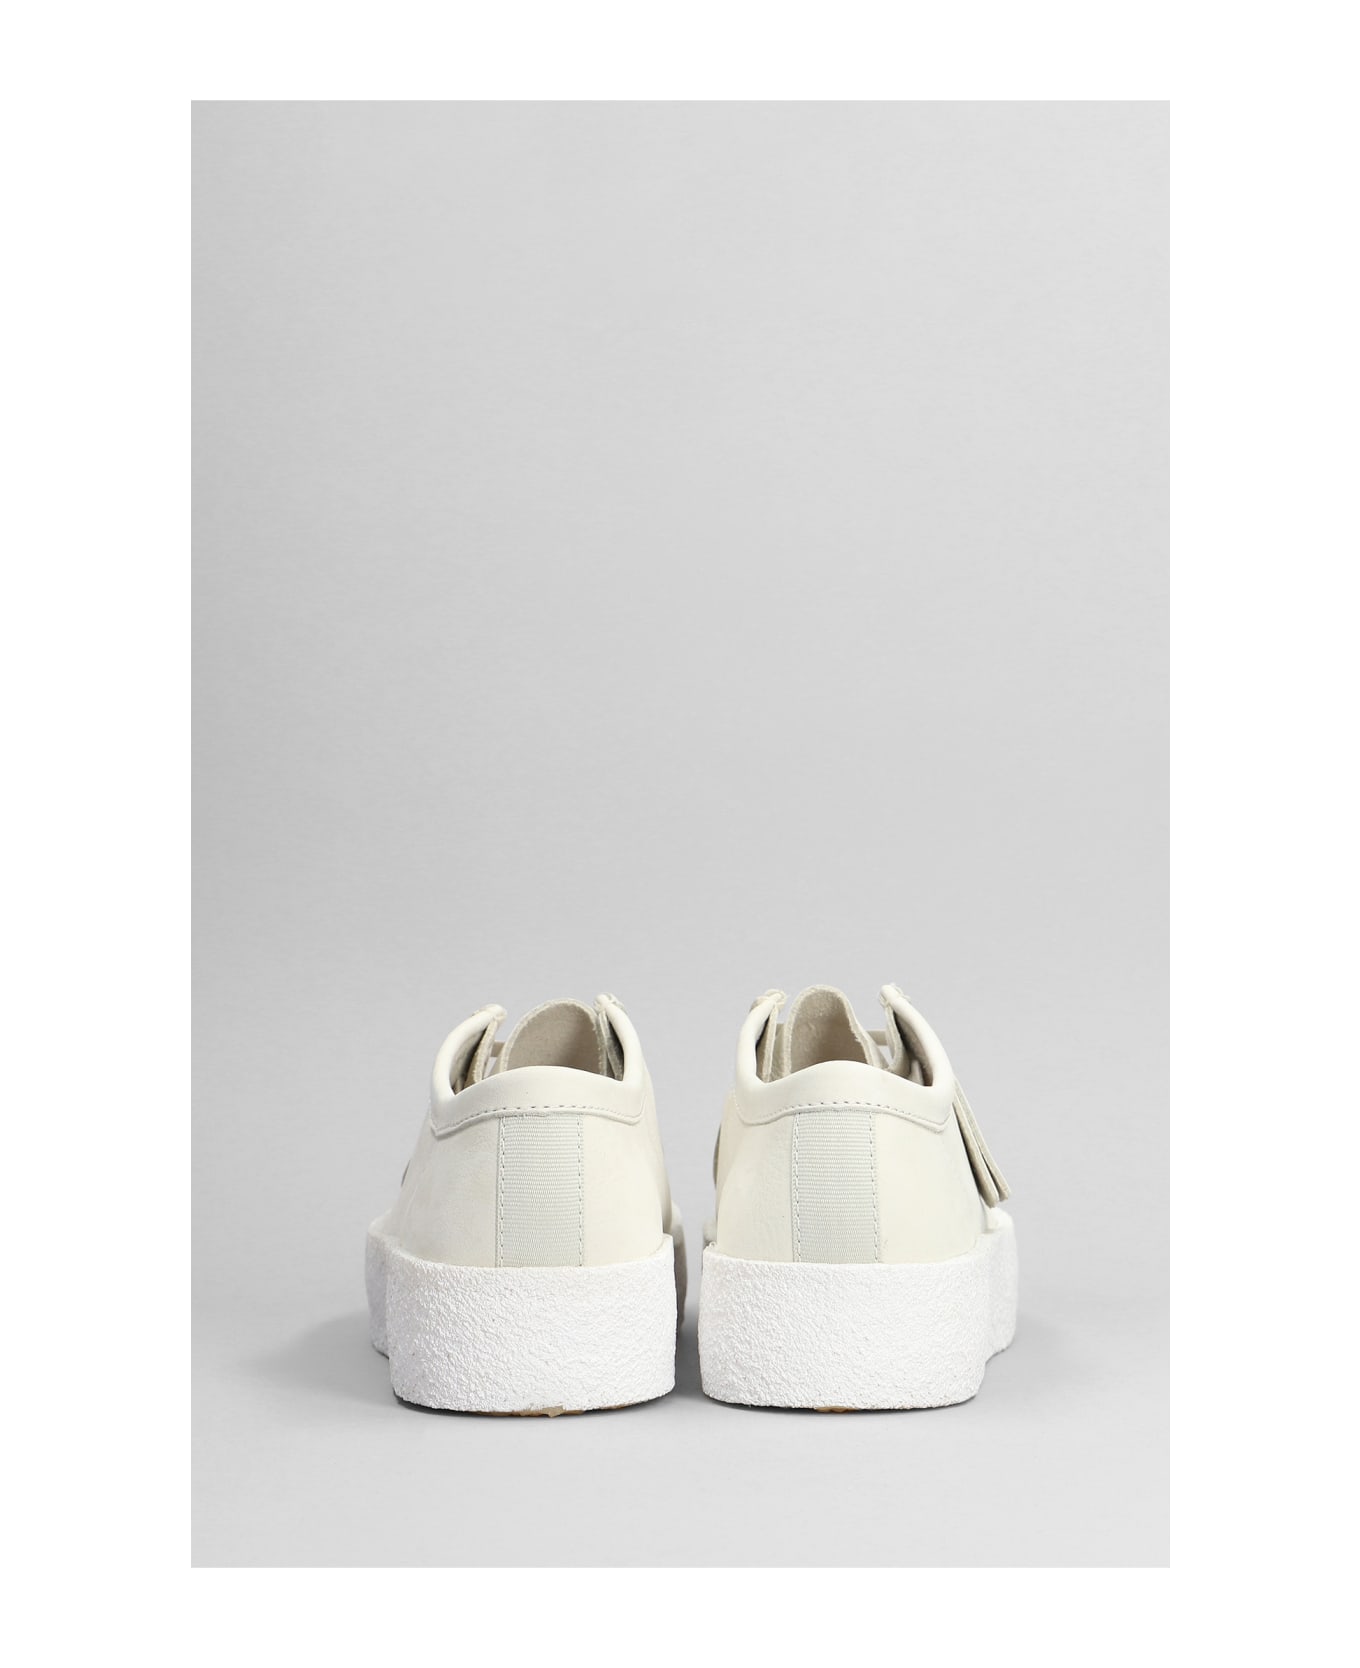 Clarks Wallabee Cup Lace Up Shoes In White Nubuck - white レースアップシューズ